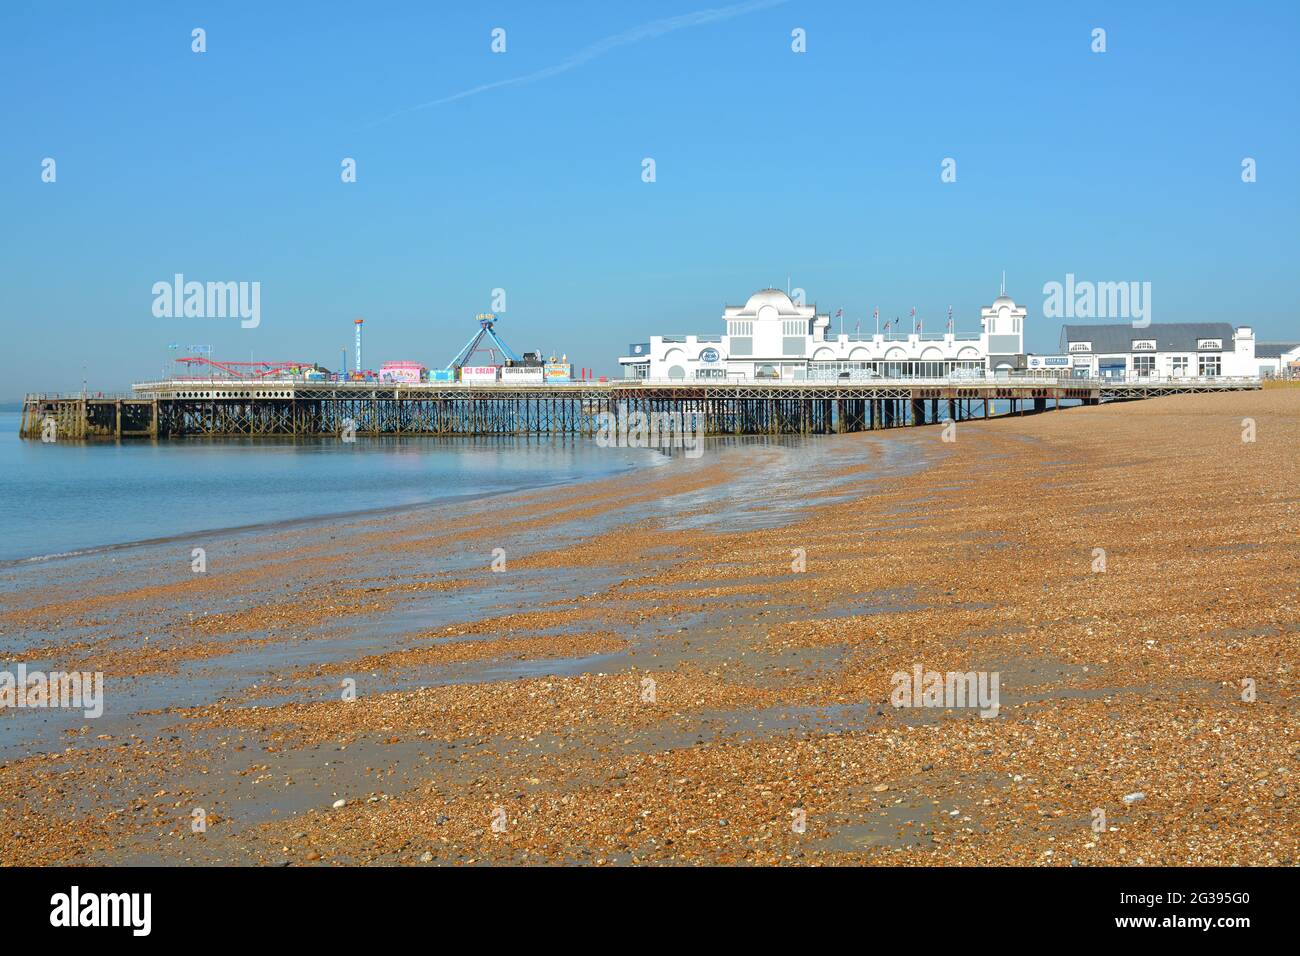 Early morning wide angle image of Portsmouth's South Parade Pier on the seafront at very low tide. Stock Photo